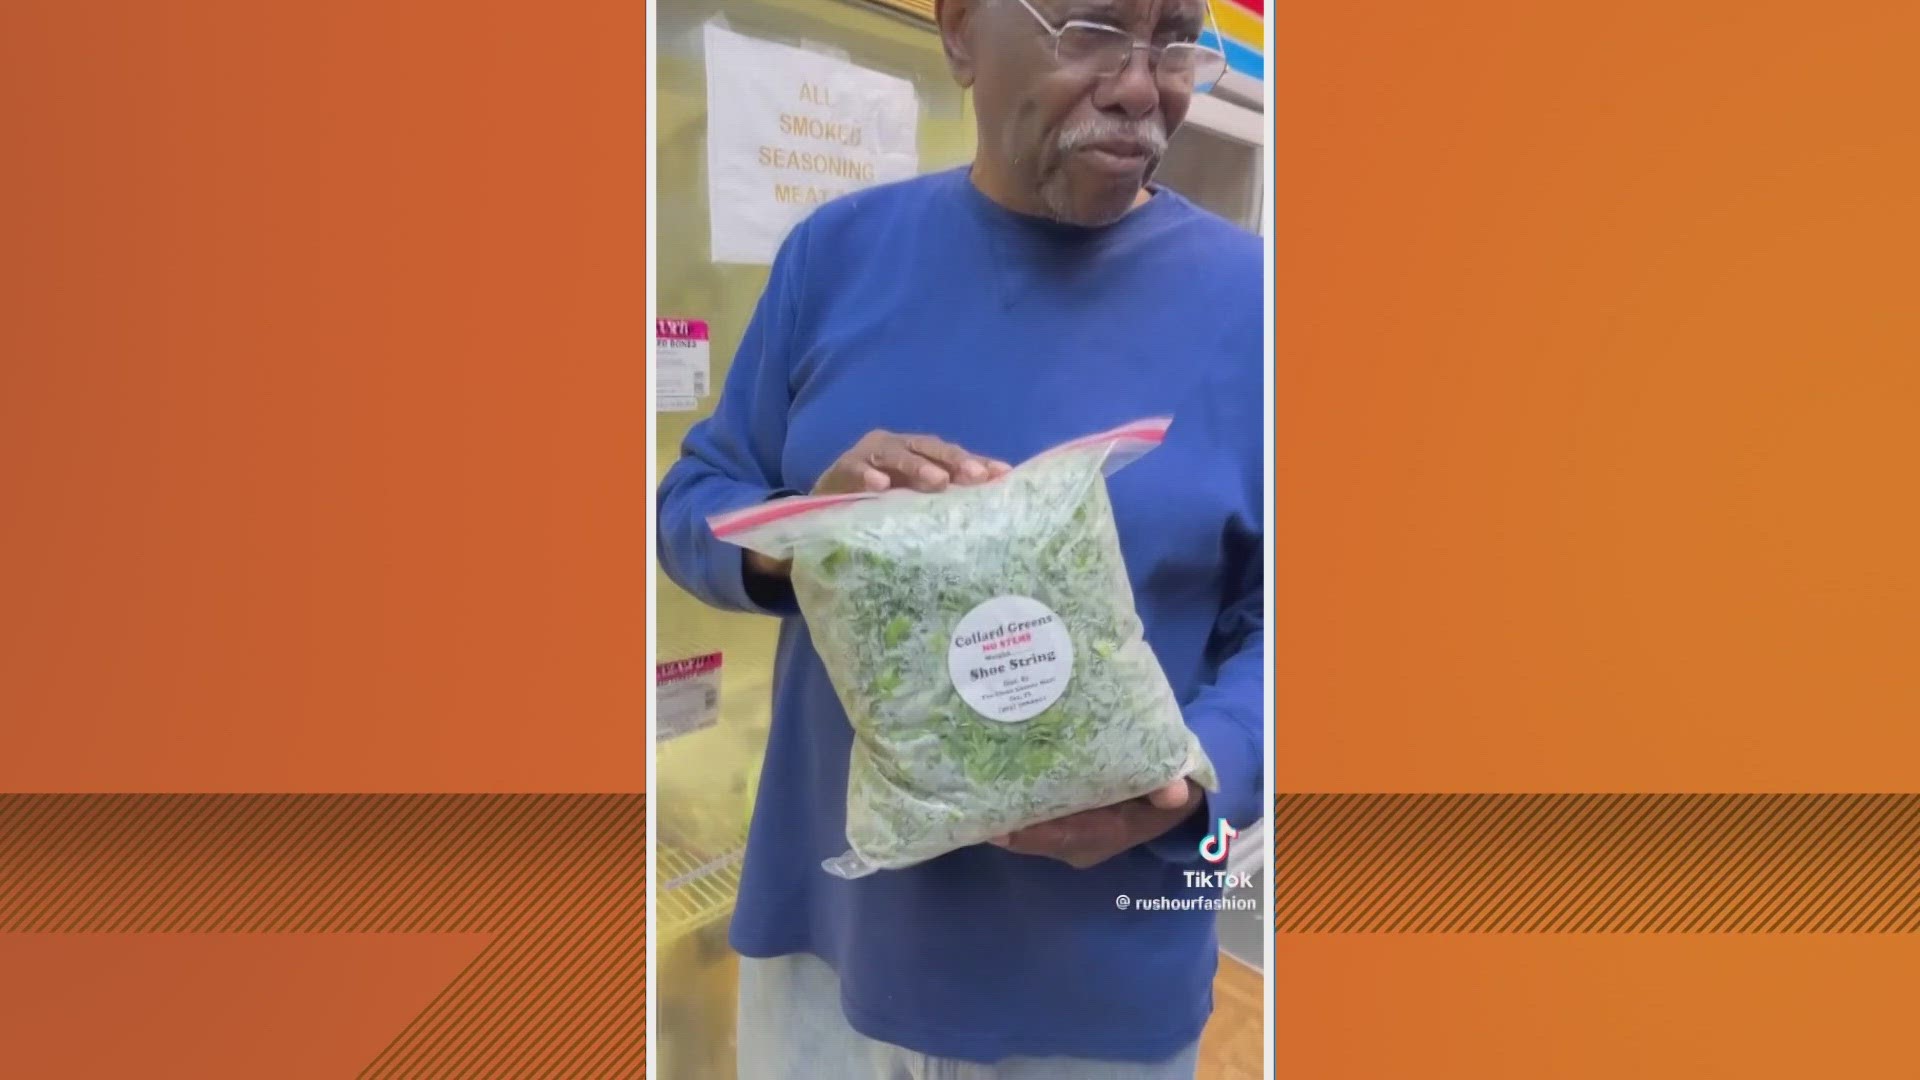 E.B. "The Green Man" Johnson says he's now getting calls to ship his collard greens out of state thanks to a local social media influencer.